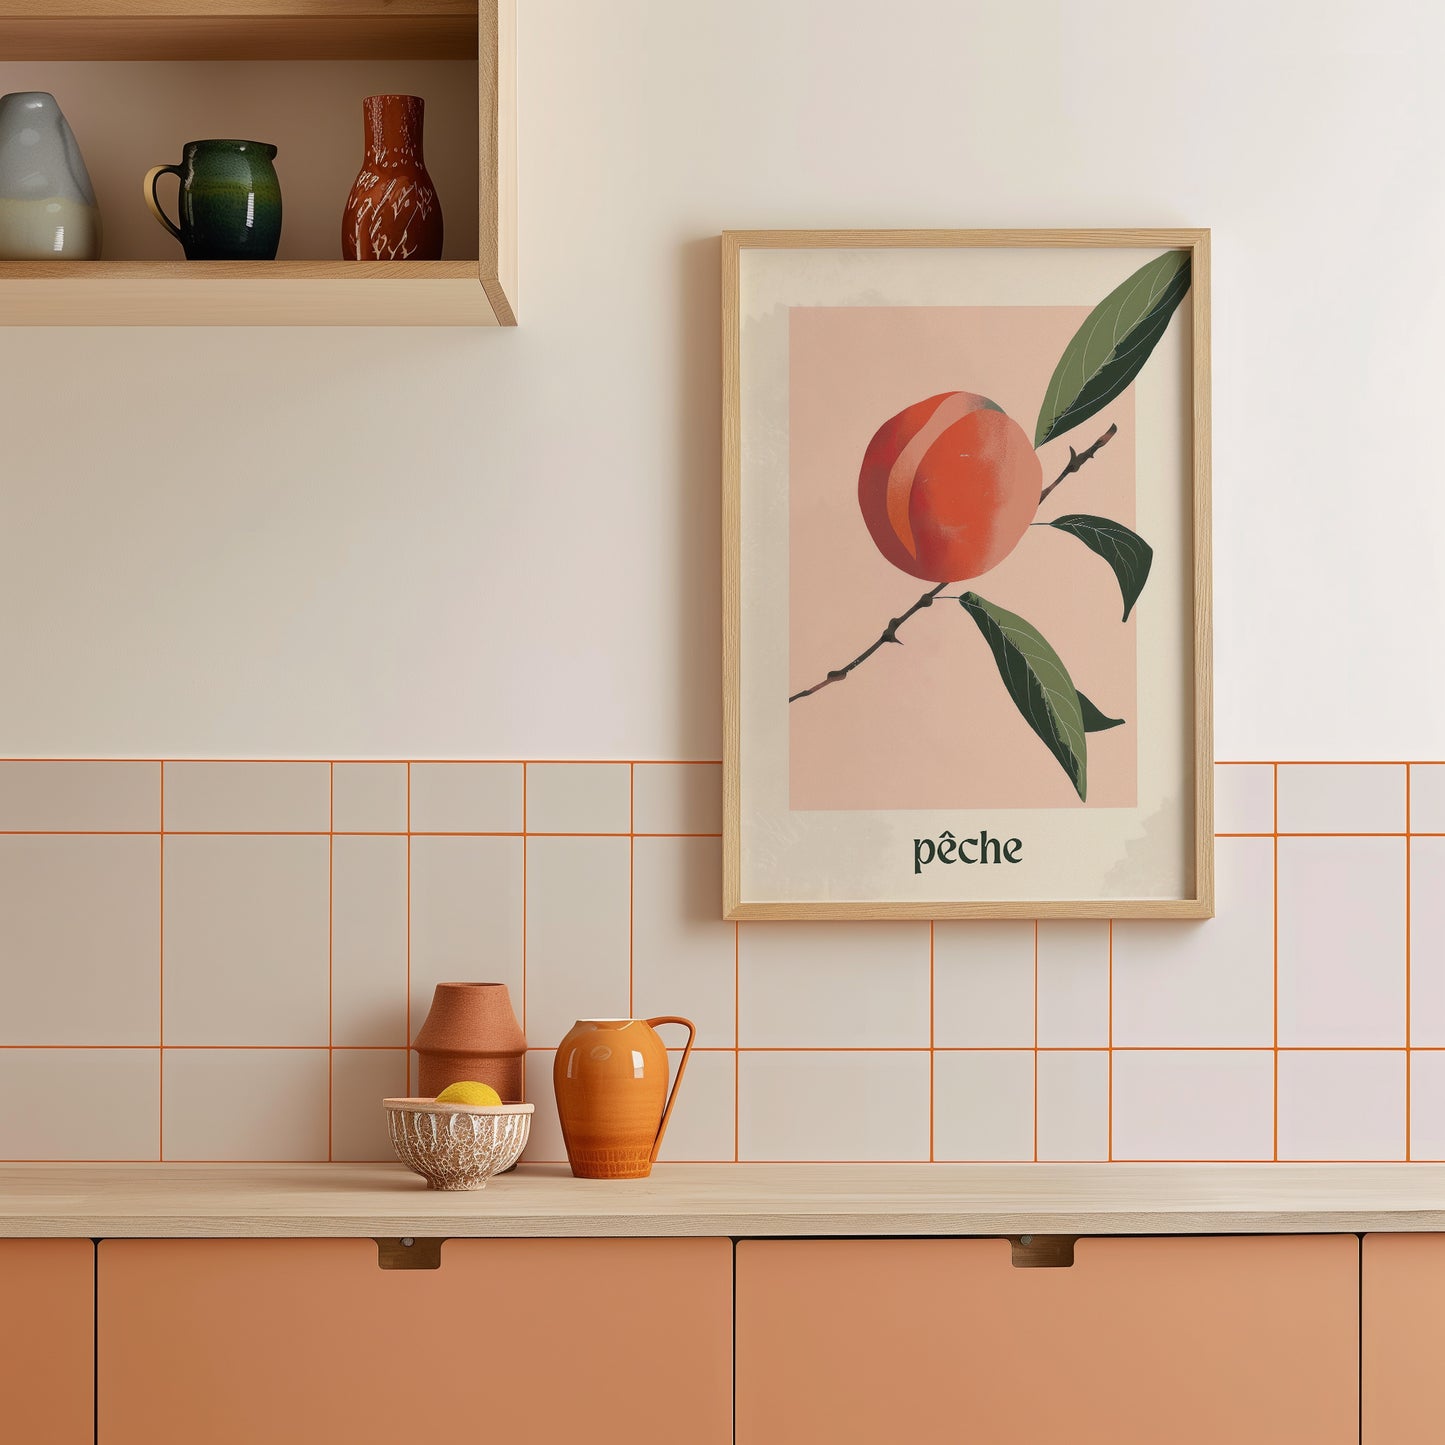 a picture of a peach on a wall above a kitchen counter